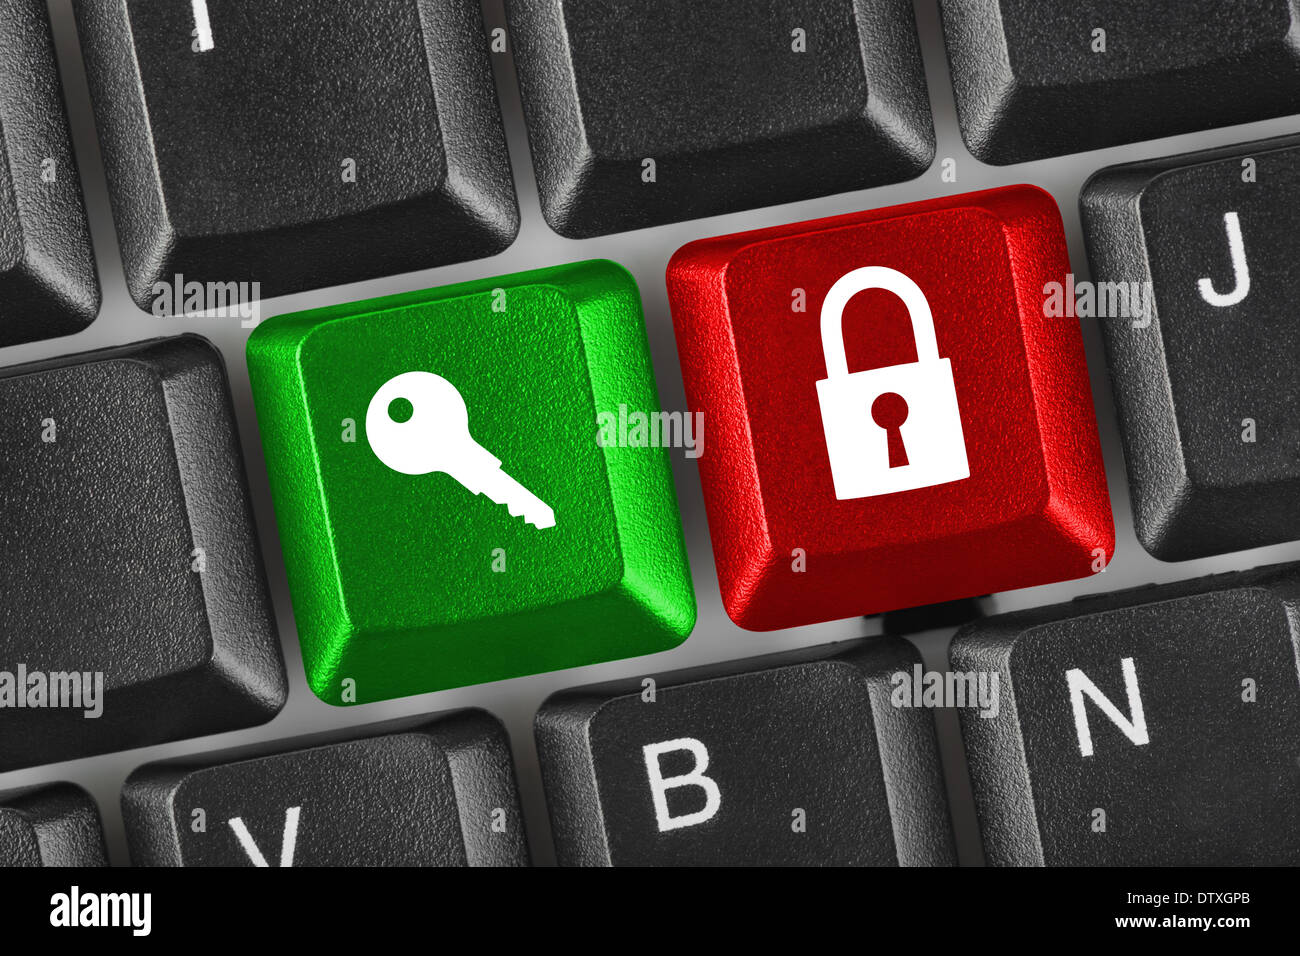 Computer keyboard with two security keys Stock Photo